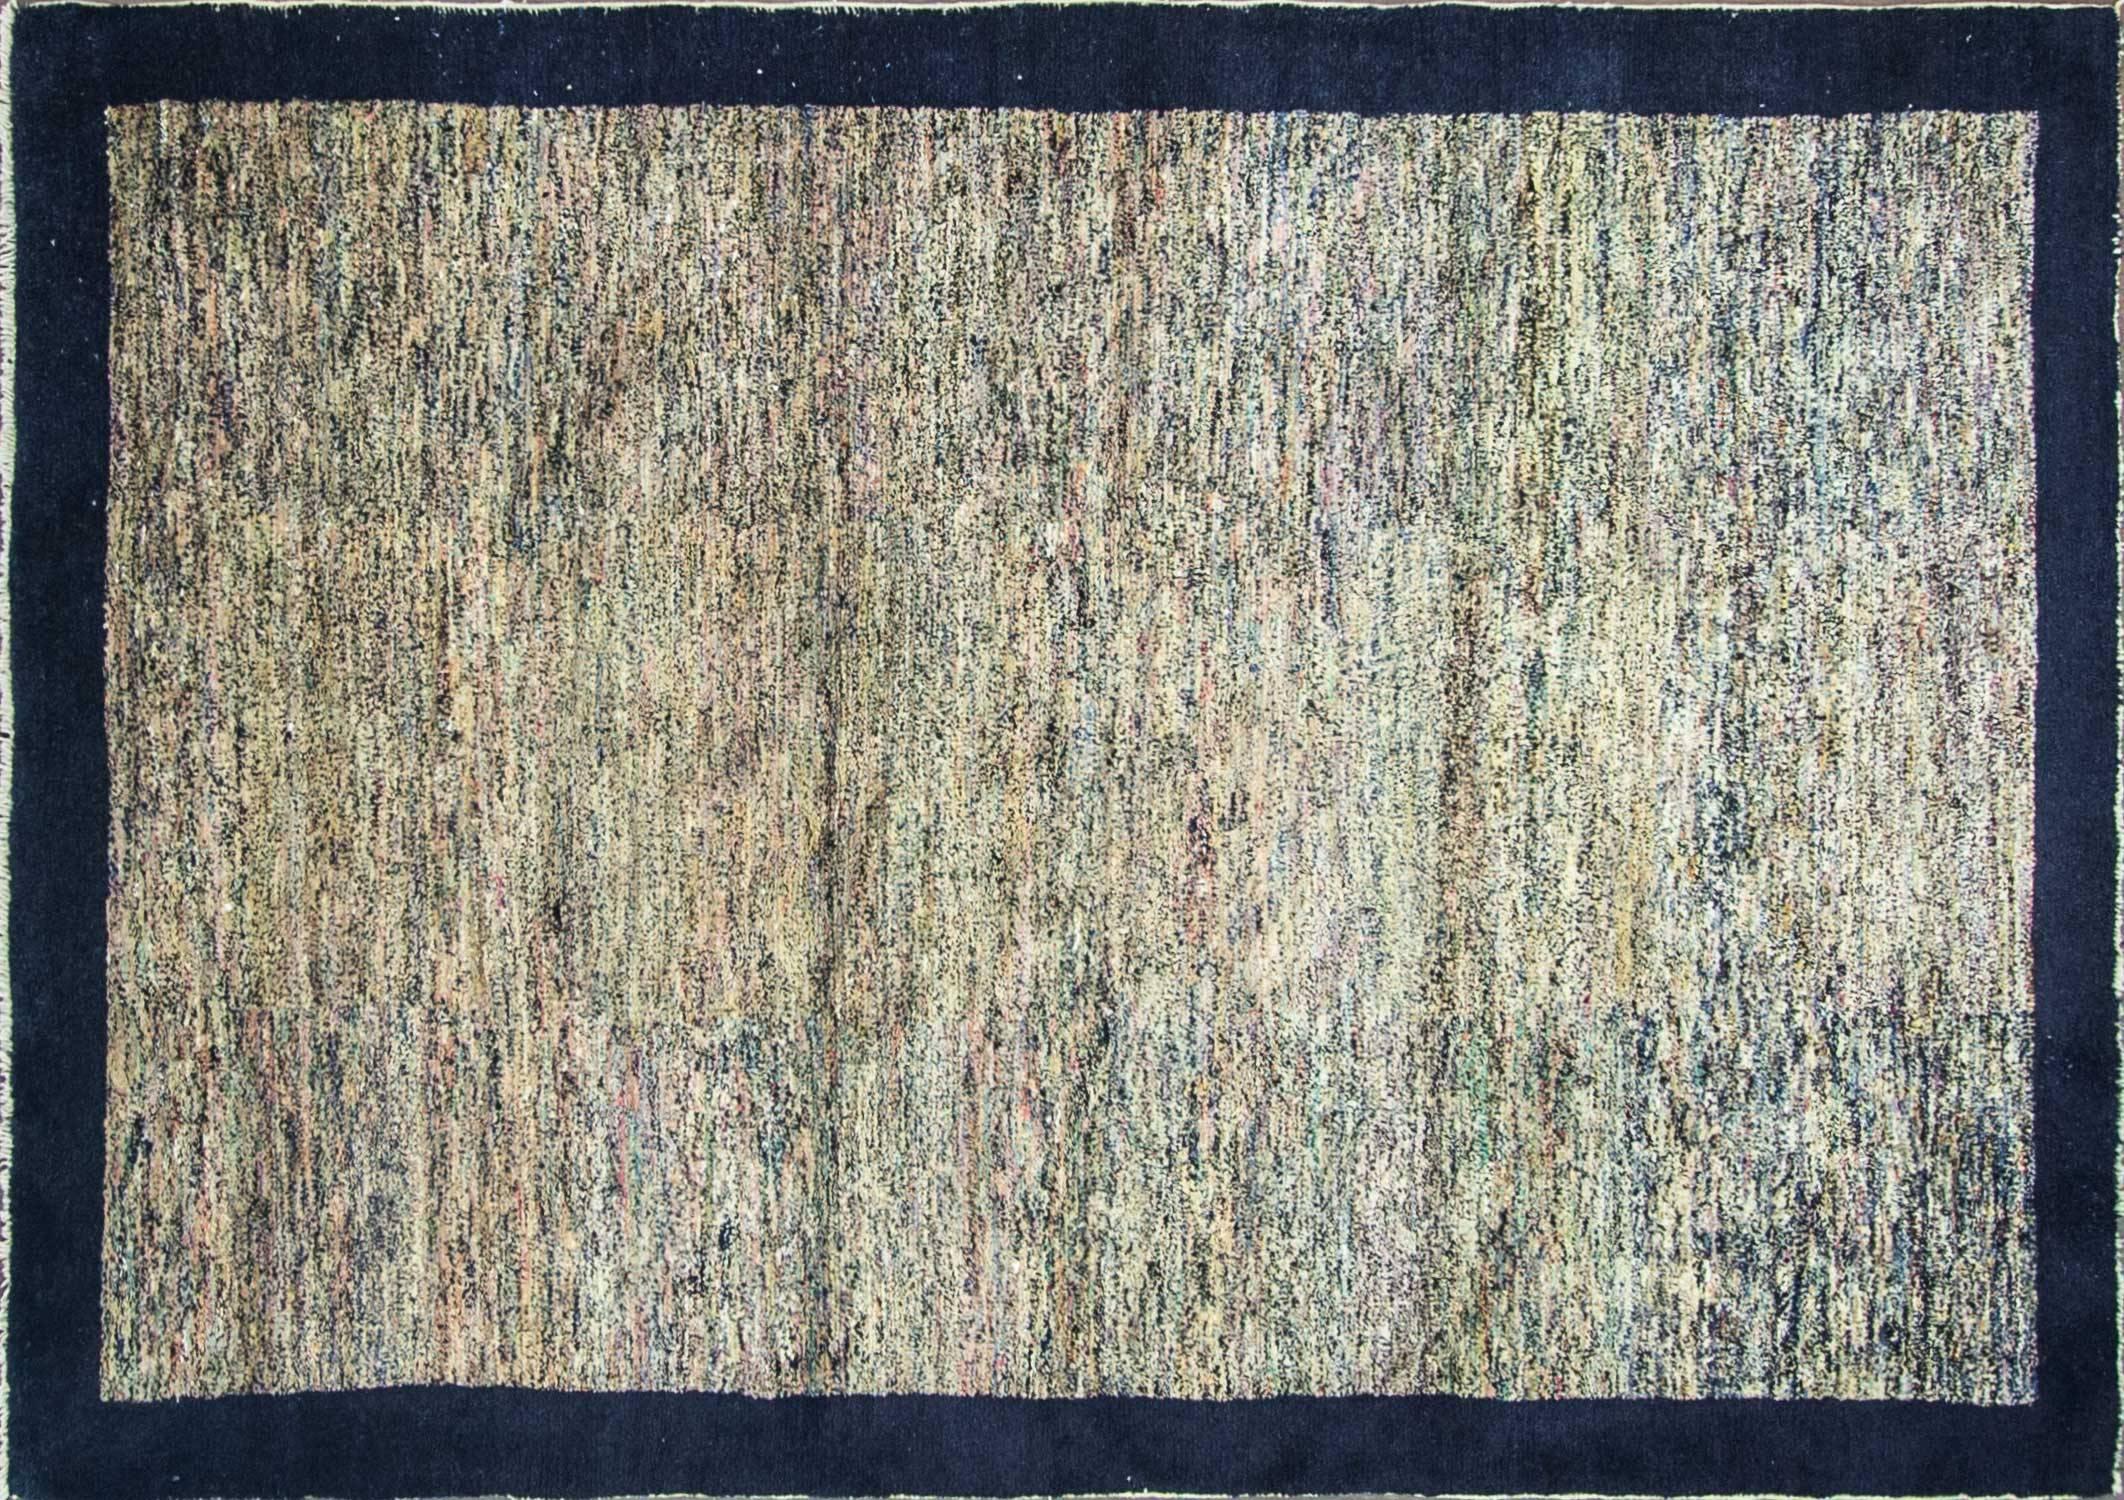 Antique Mongolian rug, Mongolia, early 20th century – woven in Mongolian around the turn of the twentieth century. Mongolian rugs and carpets occupy an interesting aesthetic place, incorporating influence from China yet articulating distinct